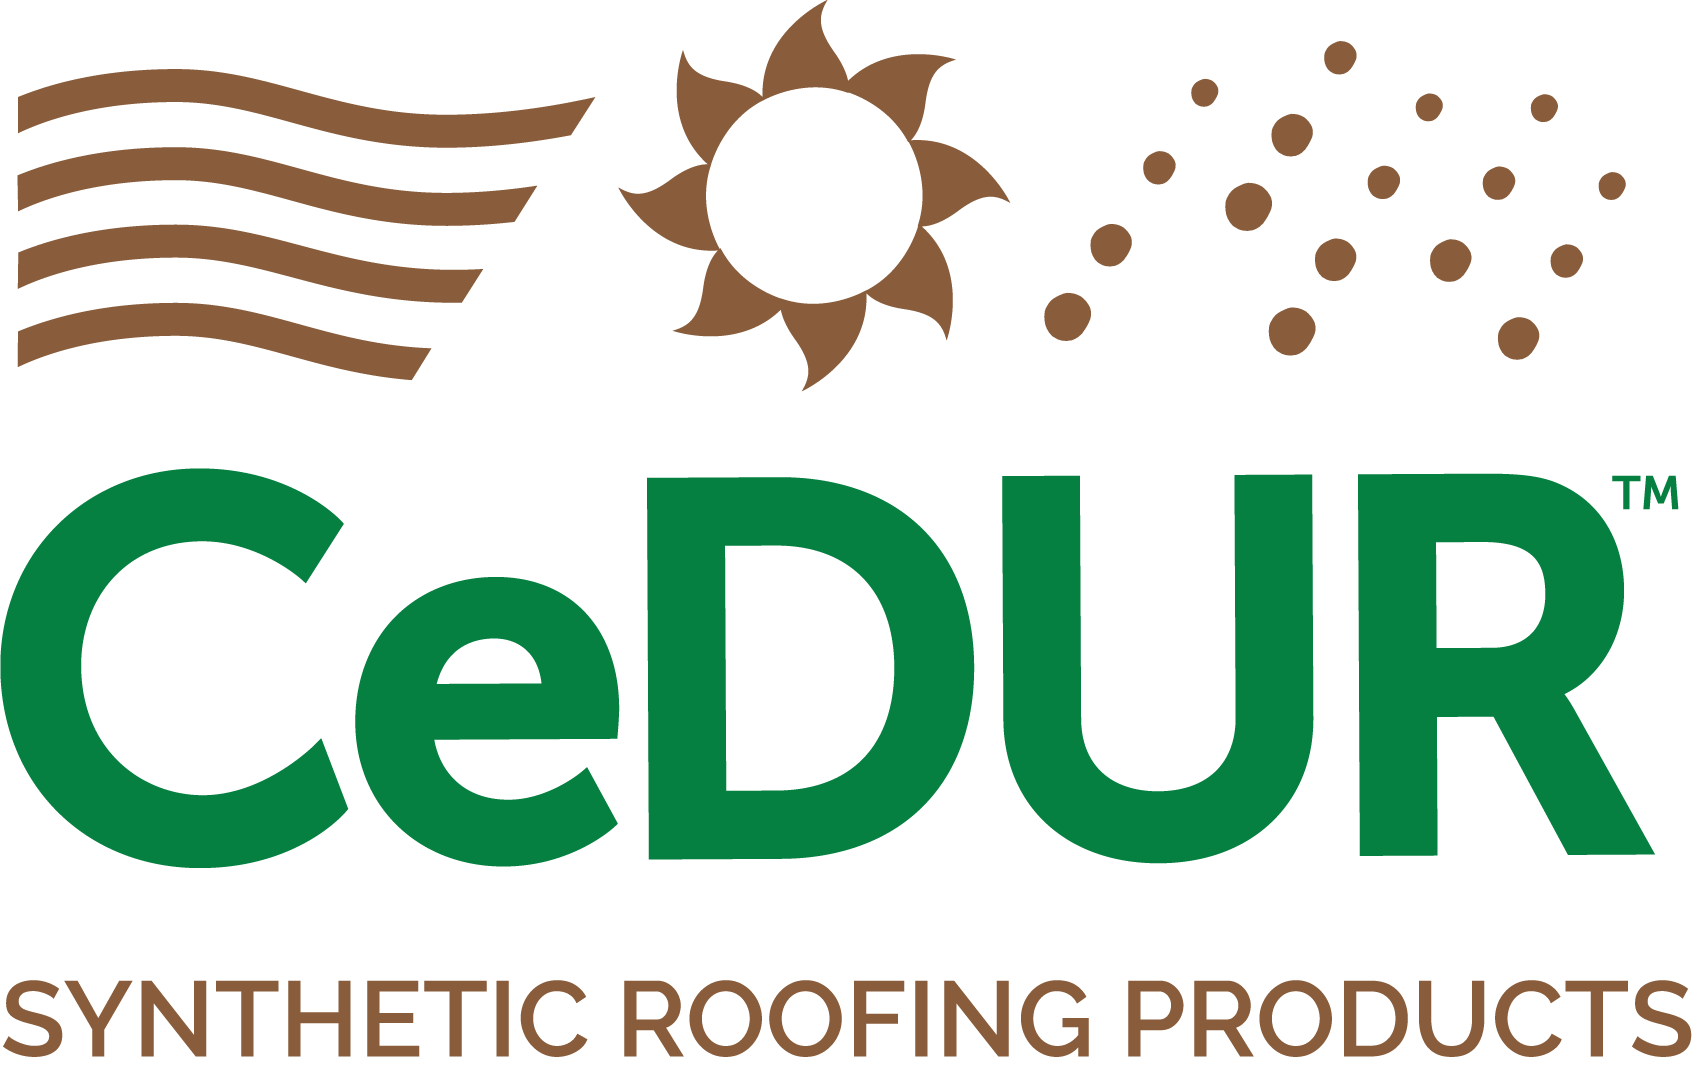 CeDUR Synthetic Roofing Products logo